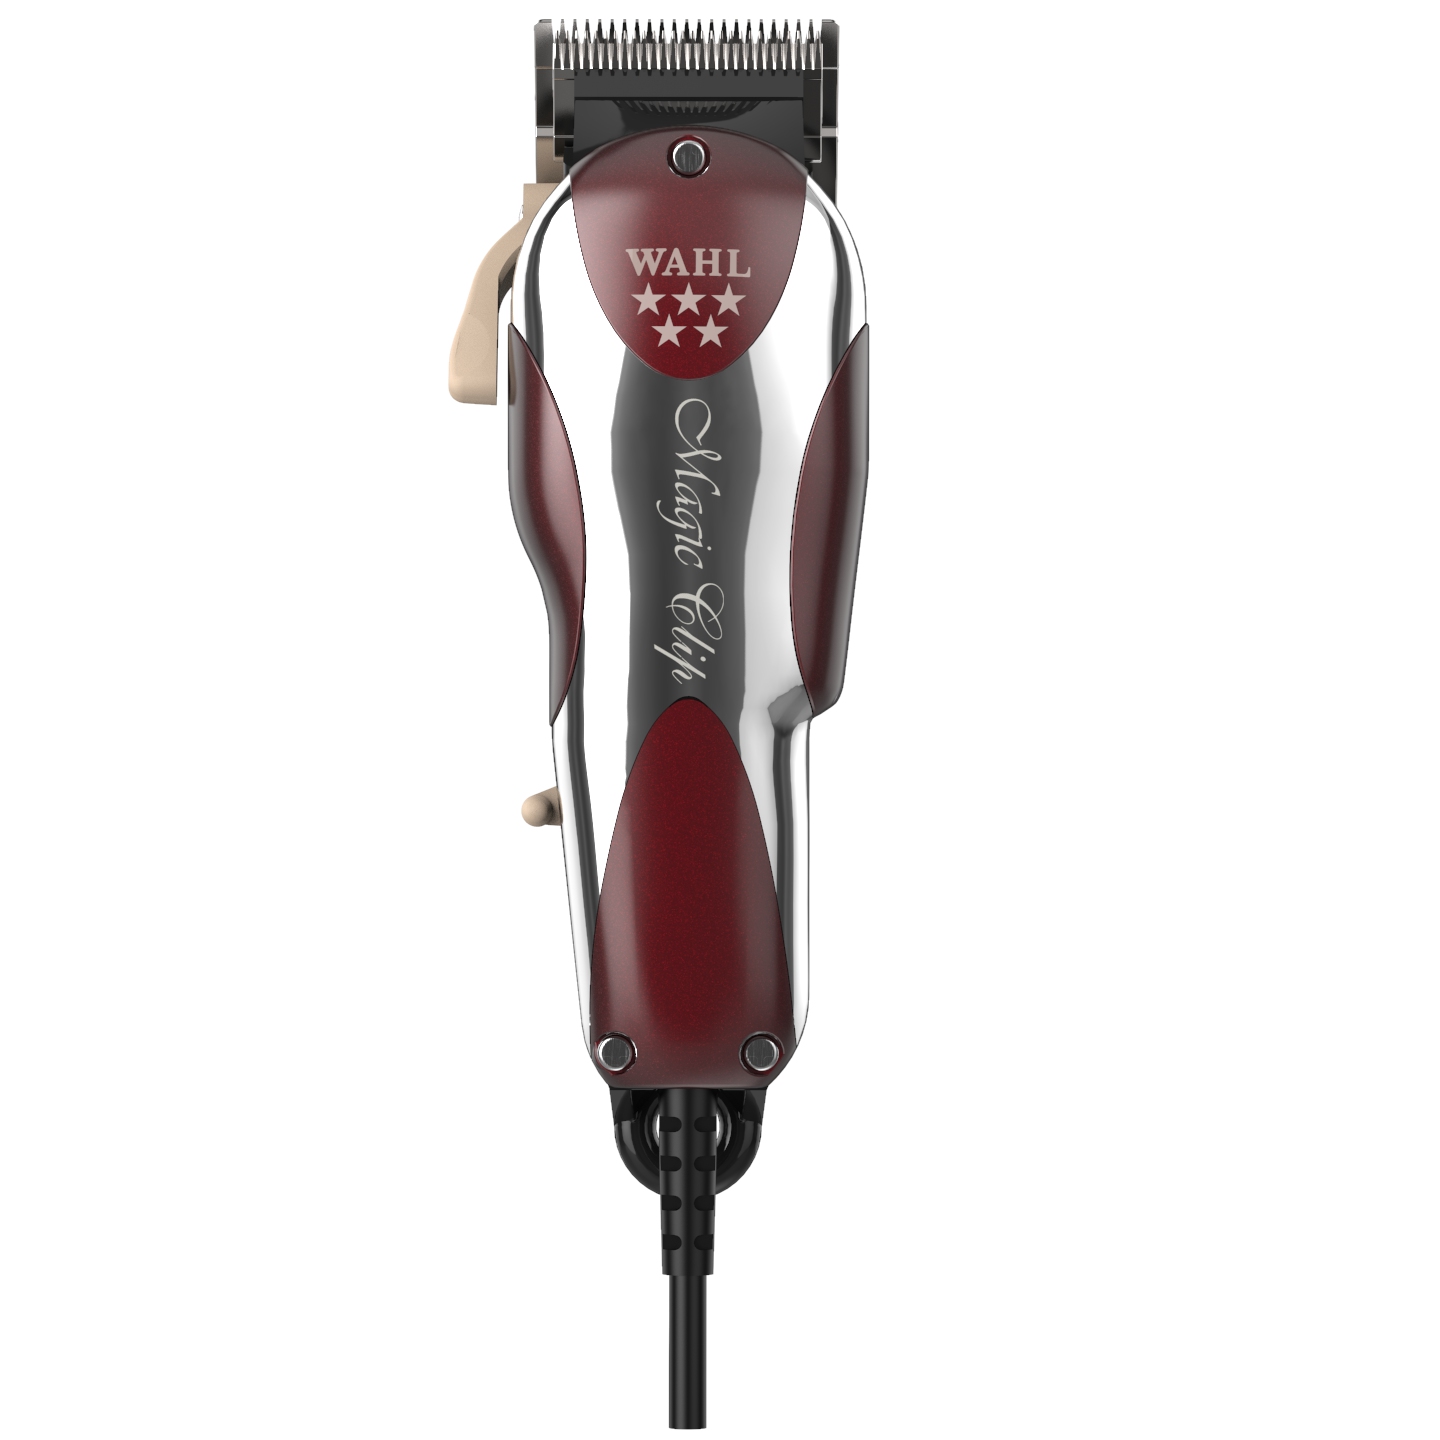 Wahl Magic Clip Corded Professional Hair Clipper 5 Star Series UK